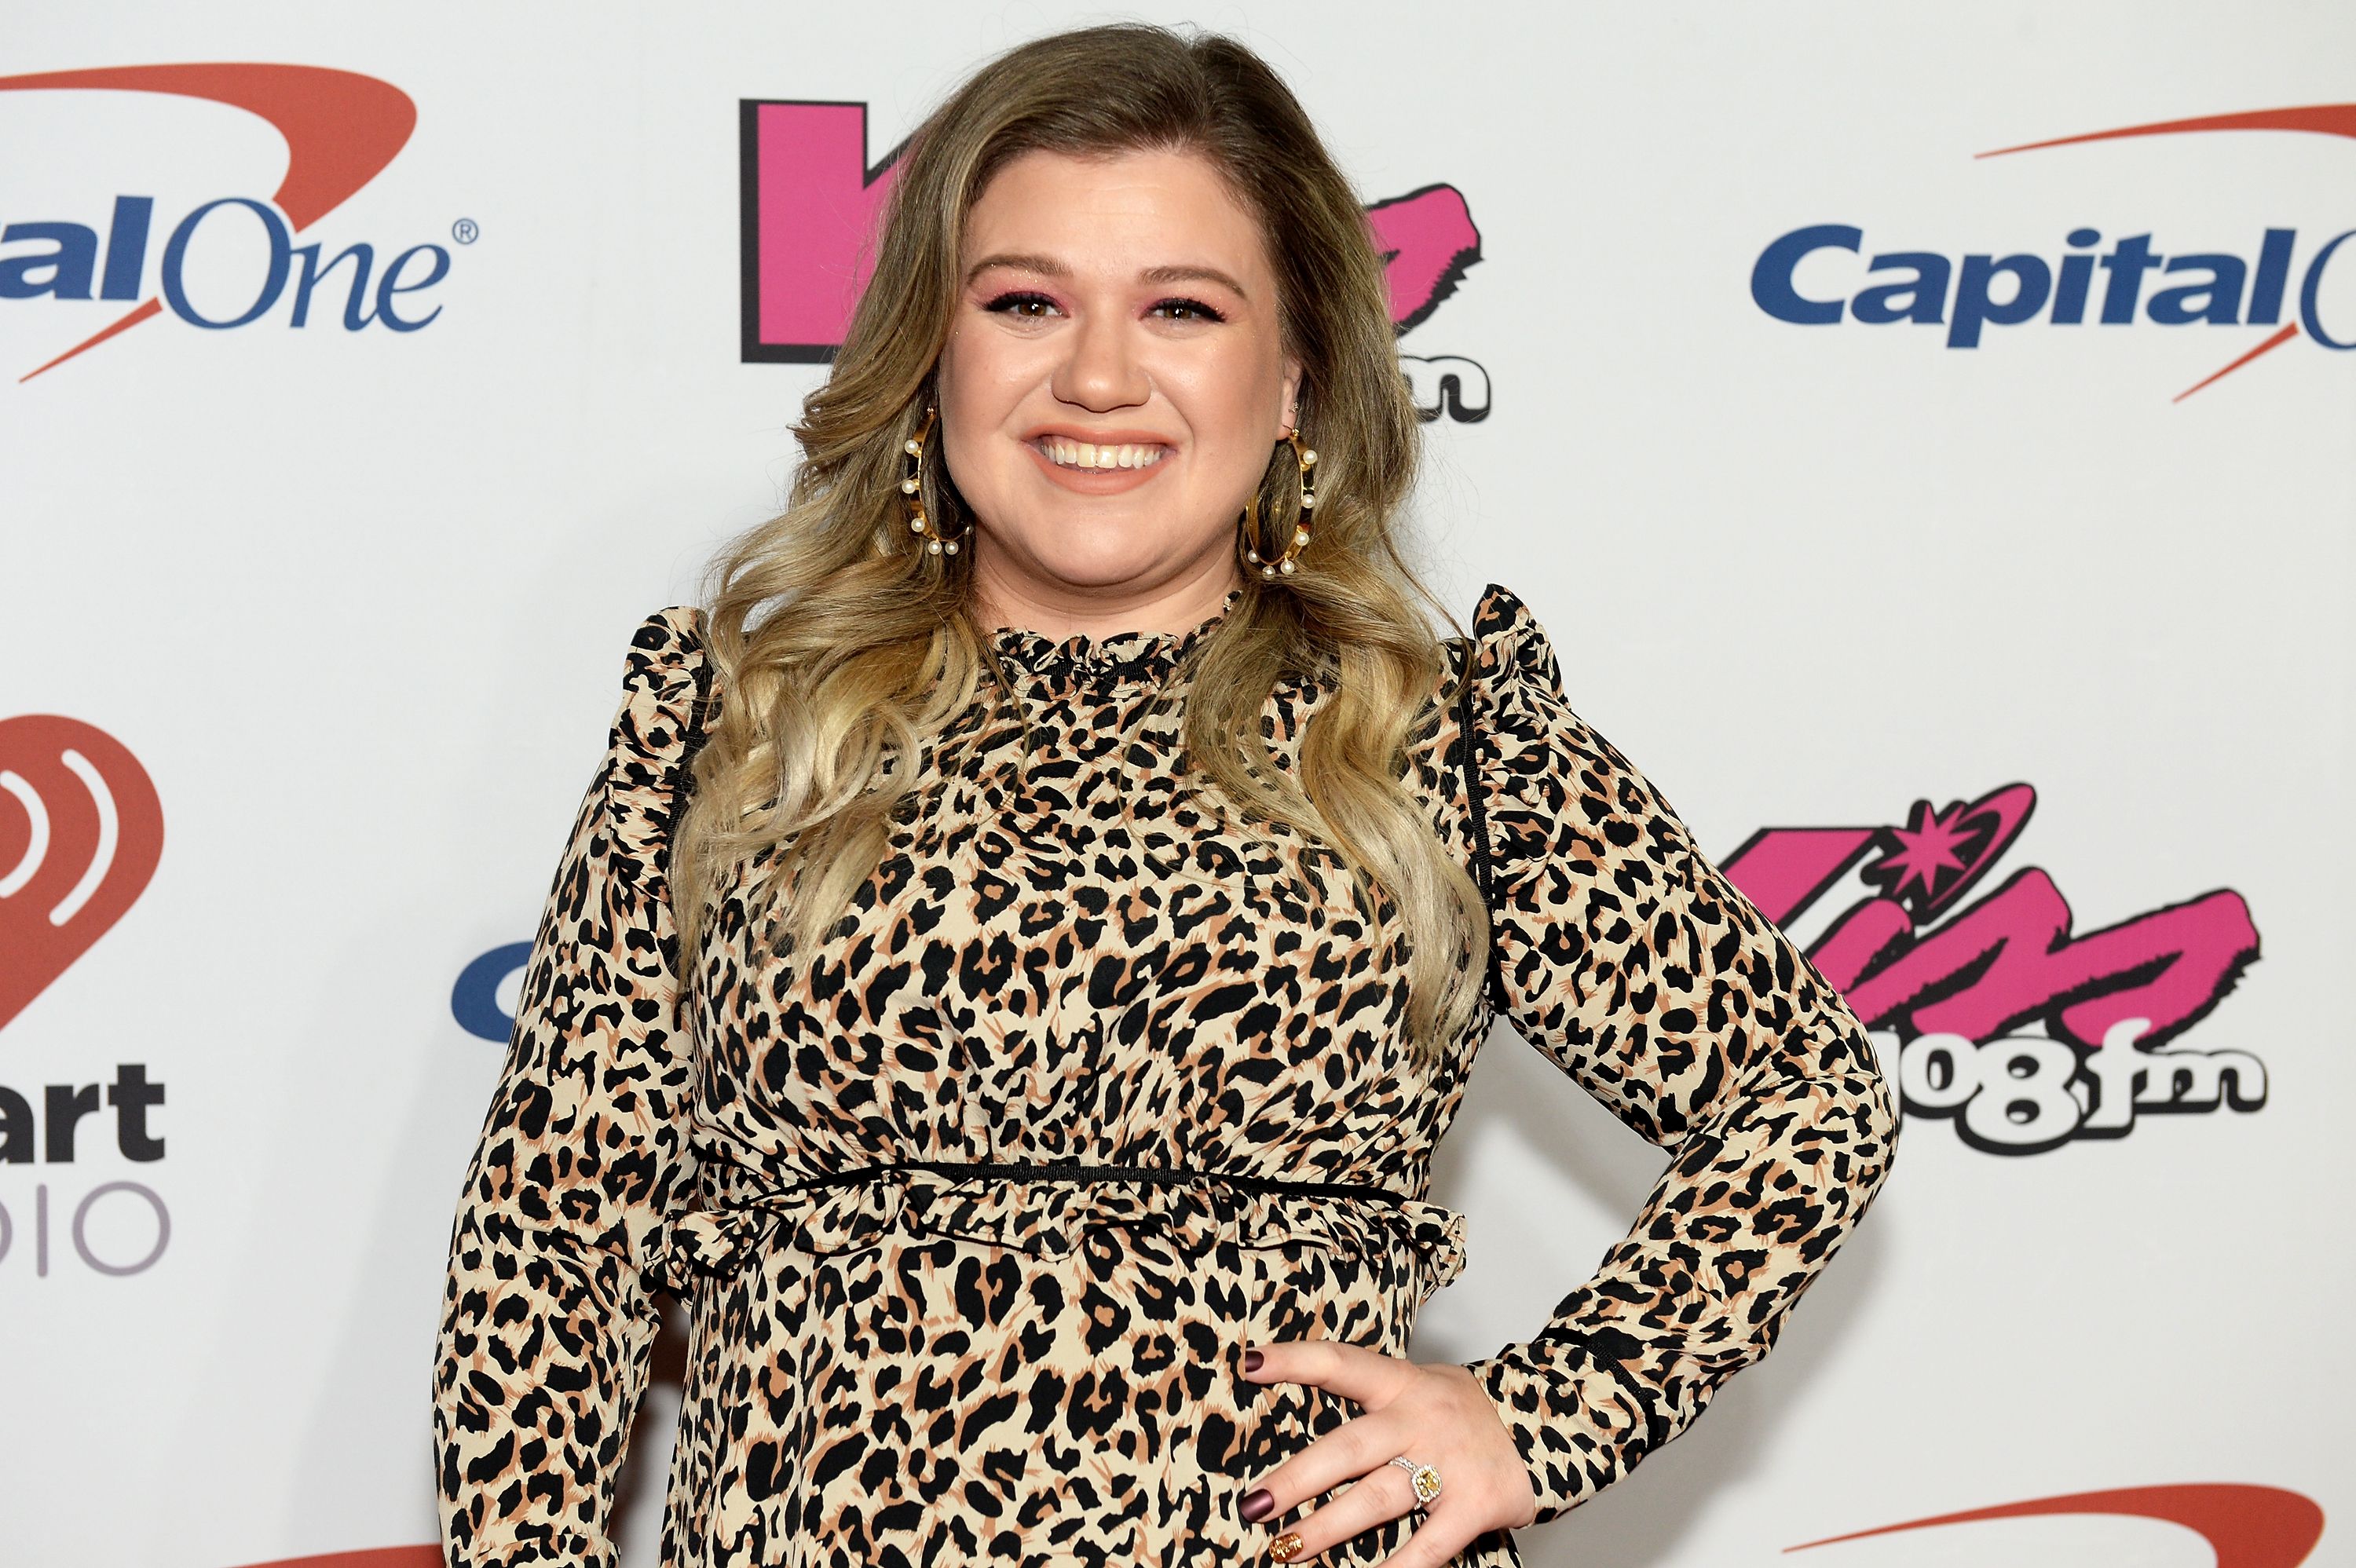 Kelly Clarkson at KISS 108's Jingle Ball 2017 presented by Capital One at TD Garden on December 10, 2017 | Photo: Getty Images